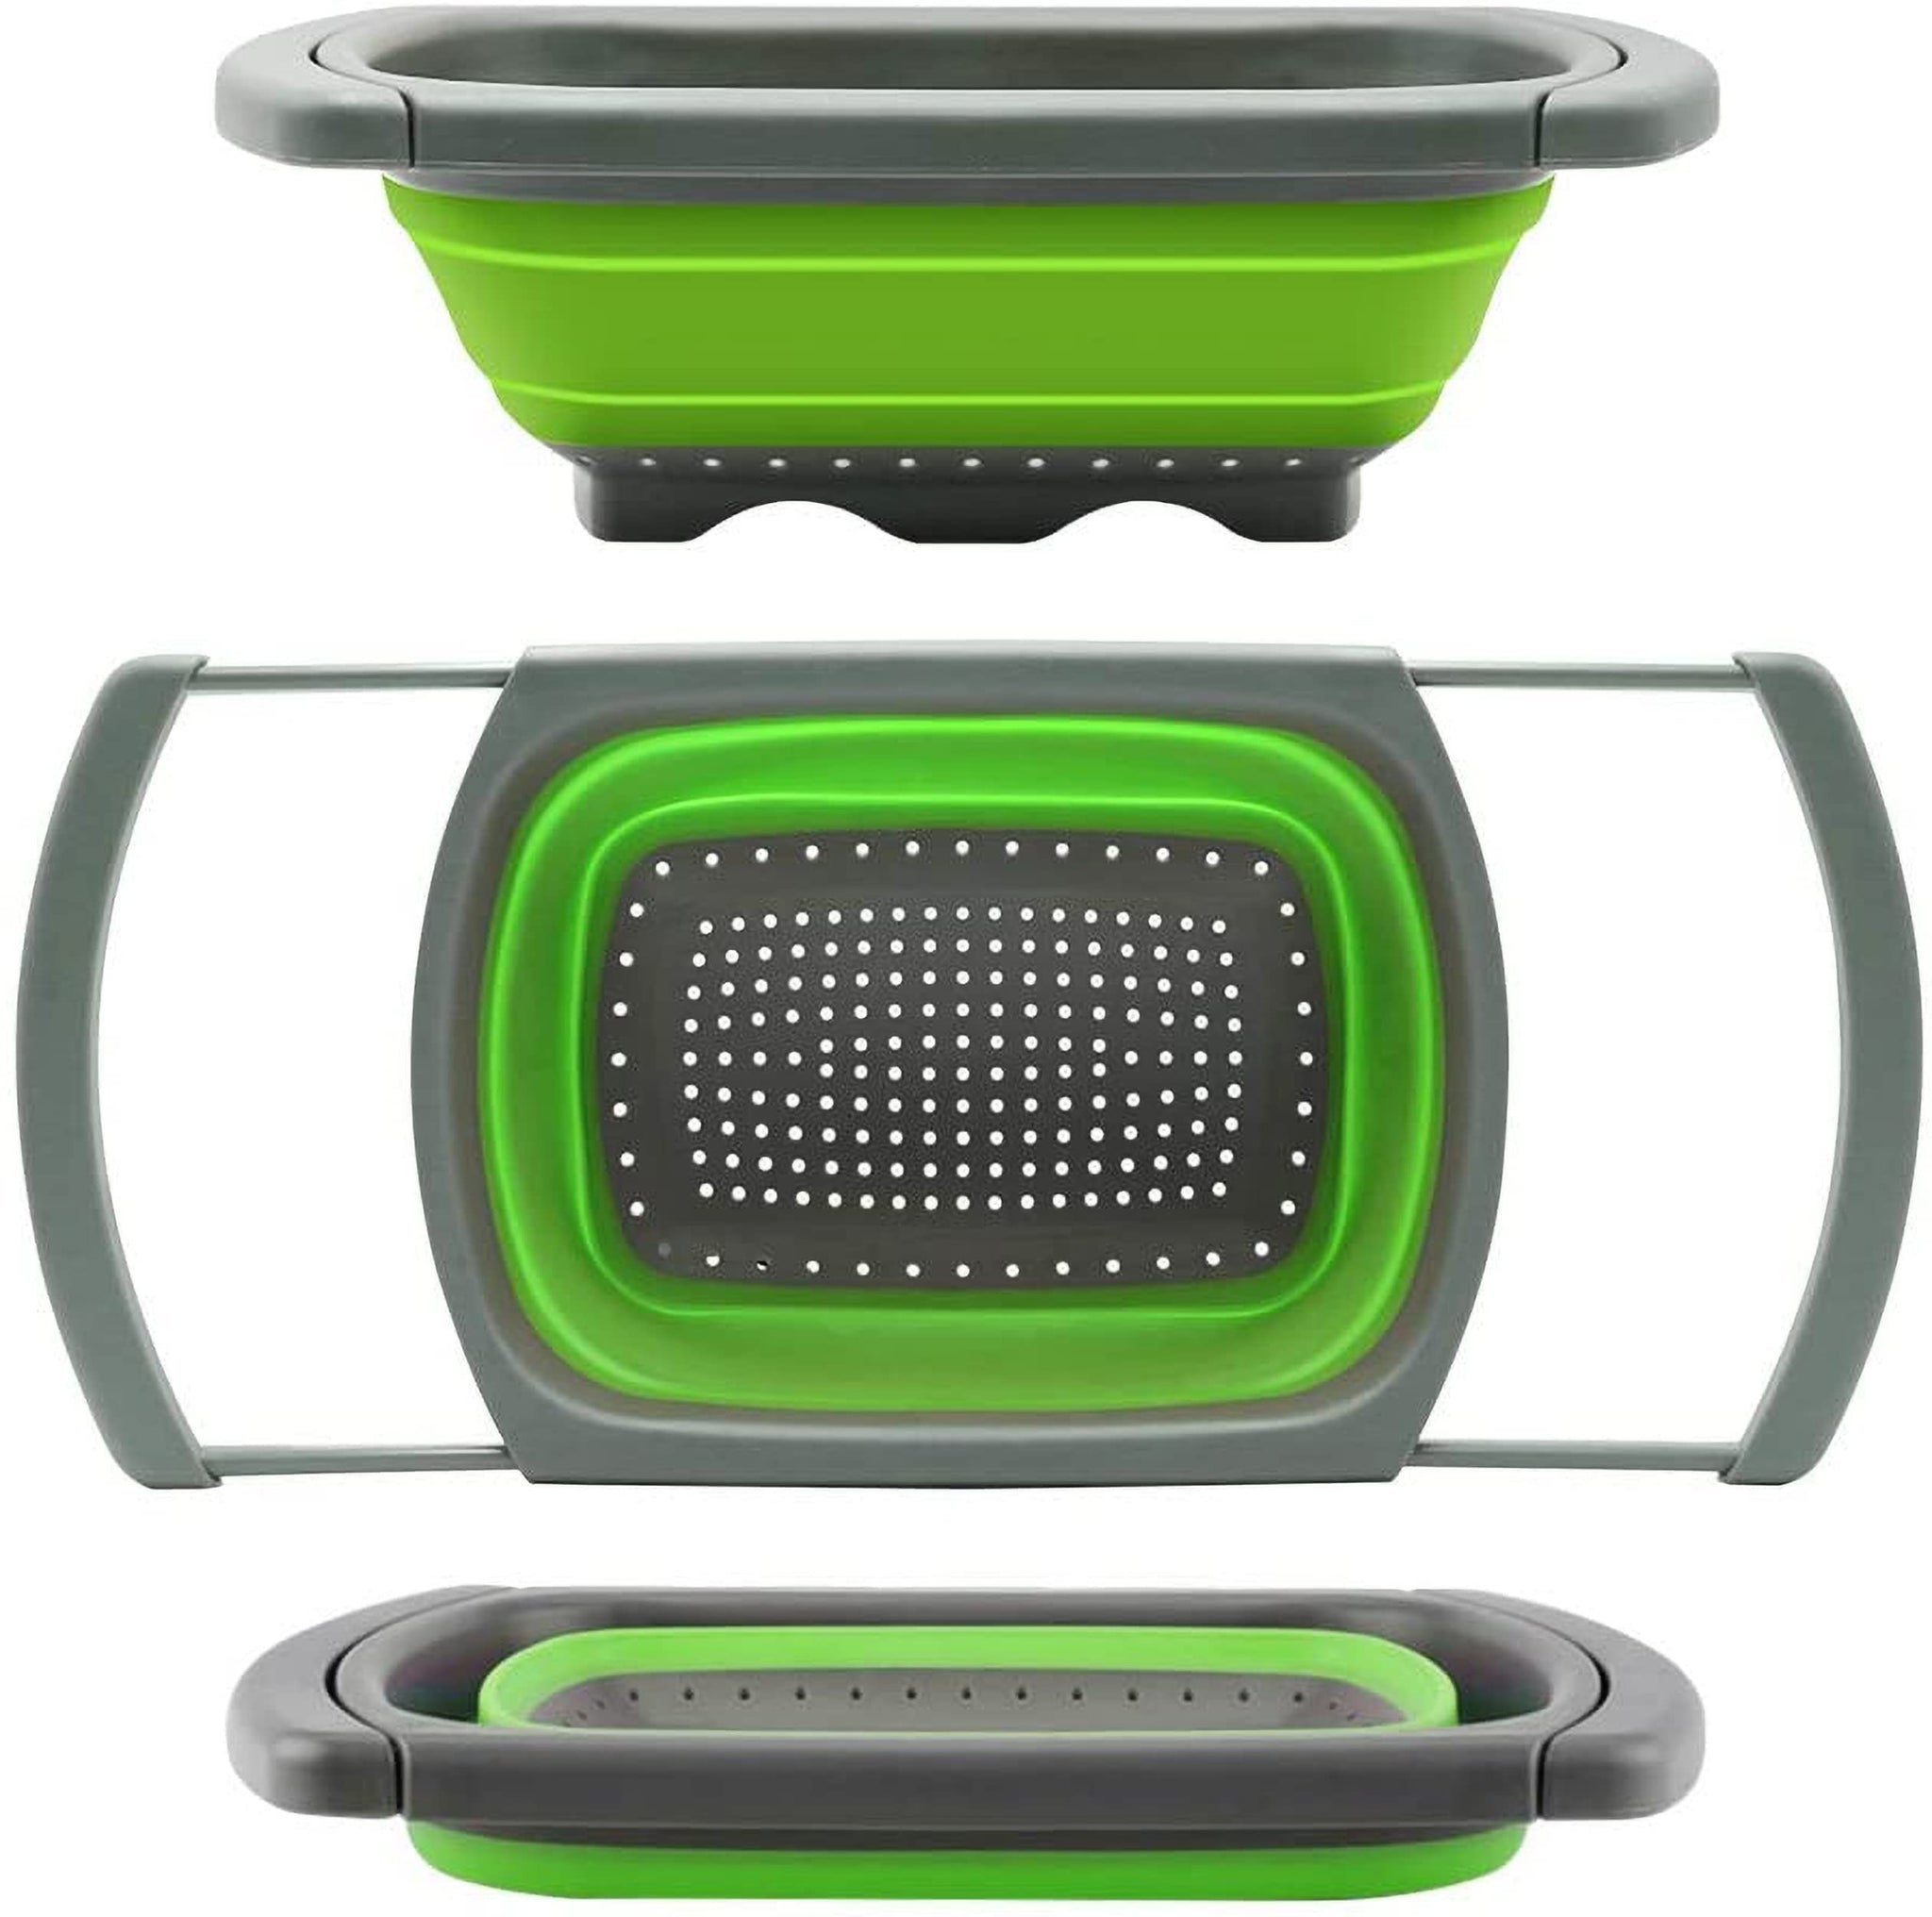 Kitchen Collapsible Colander, Strainer and Colanders | Green